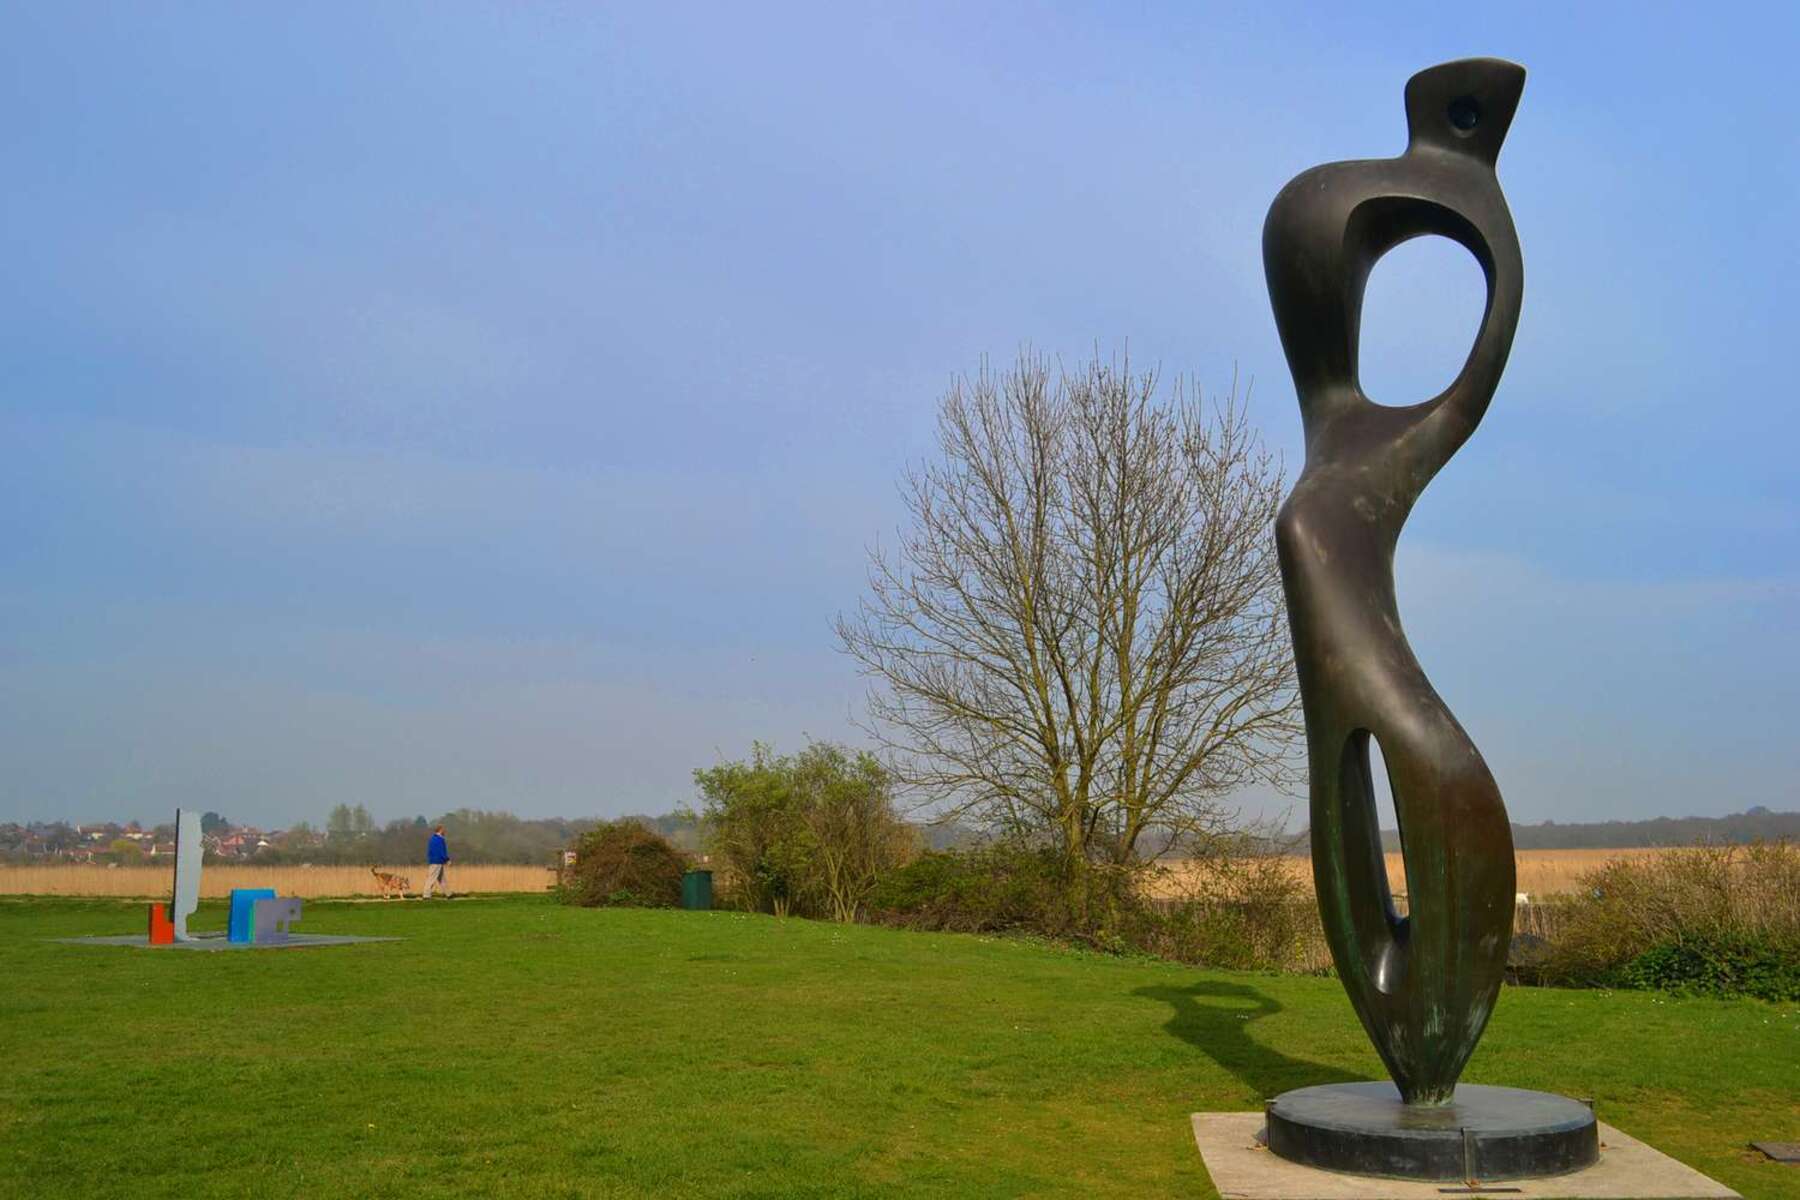 What Term Describes The Negative Space Created By A Sculpture?